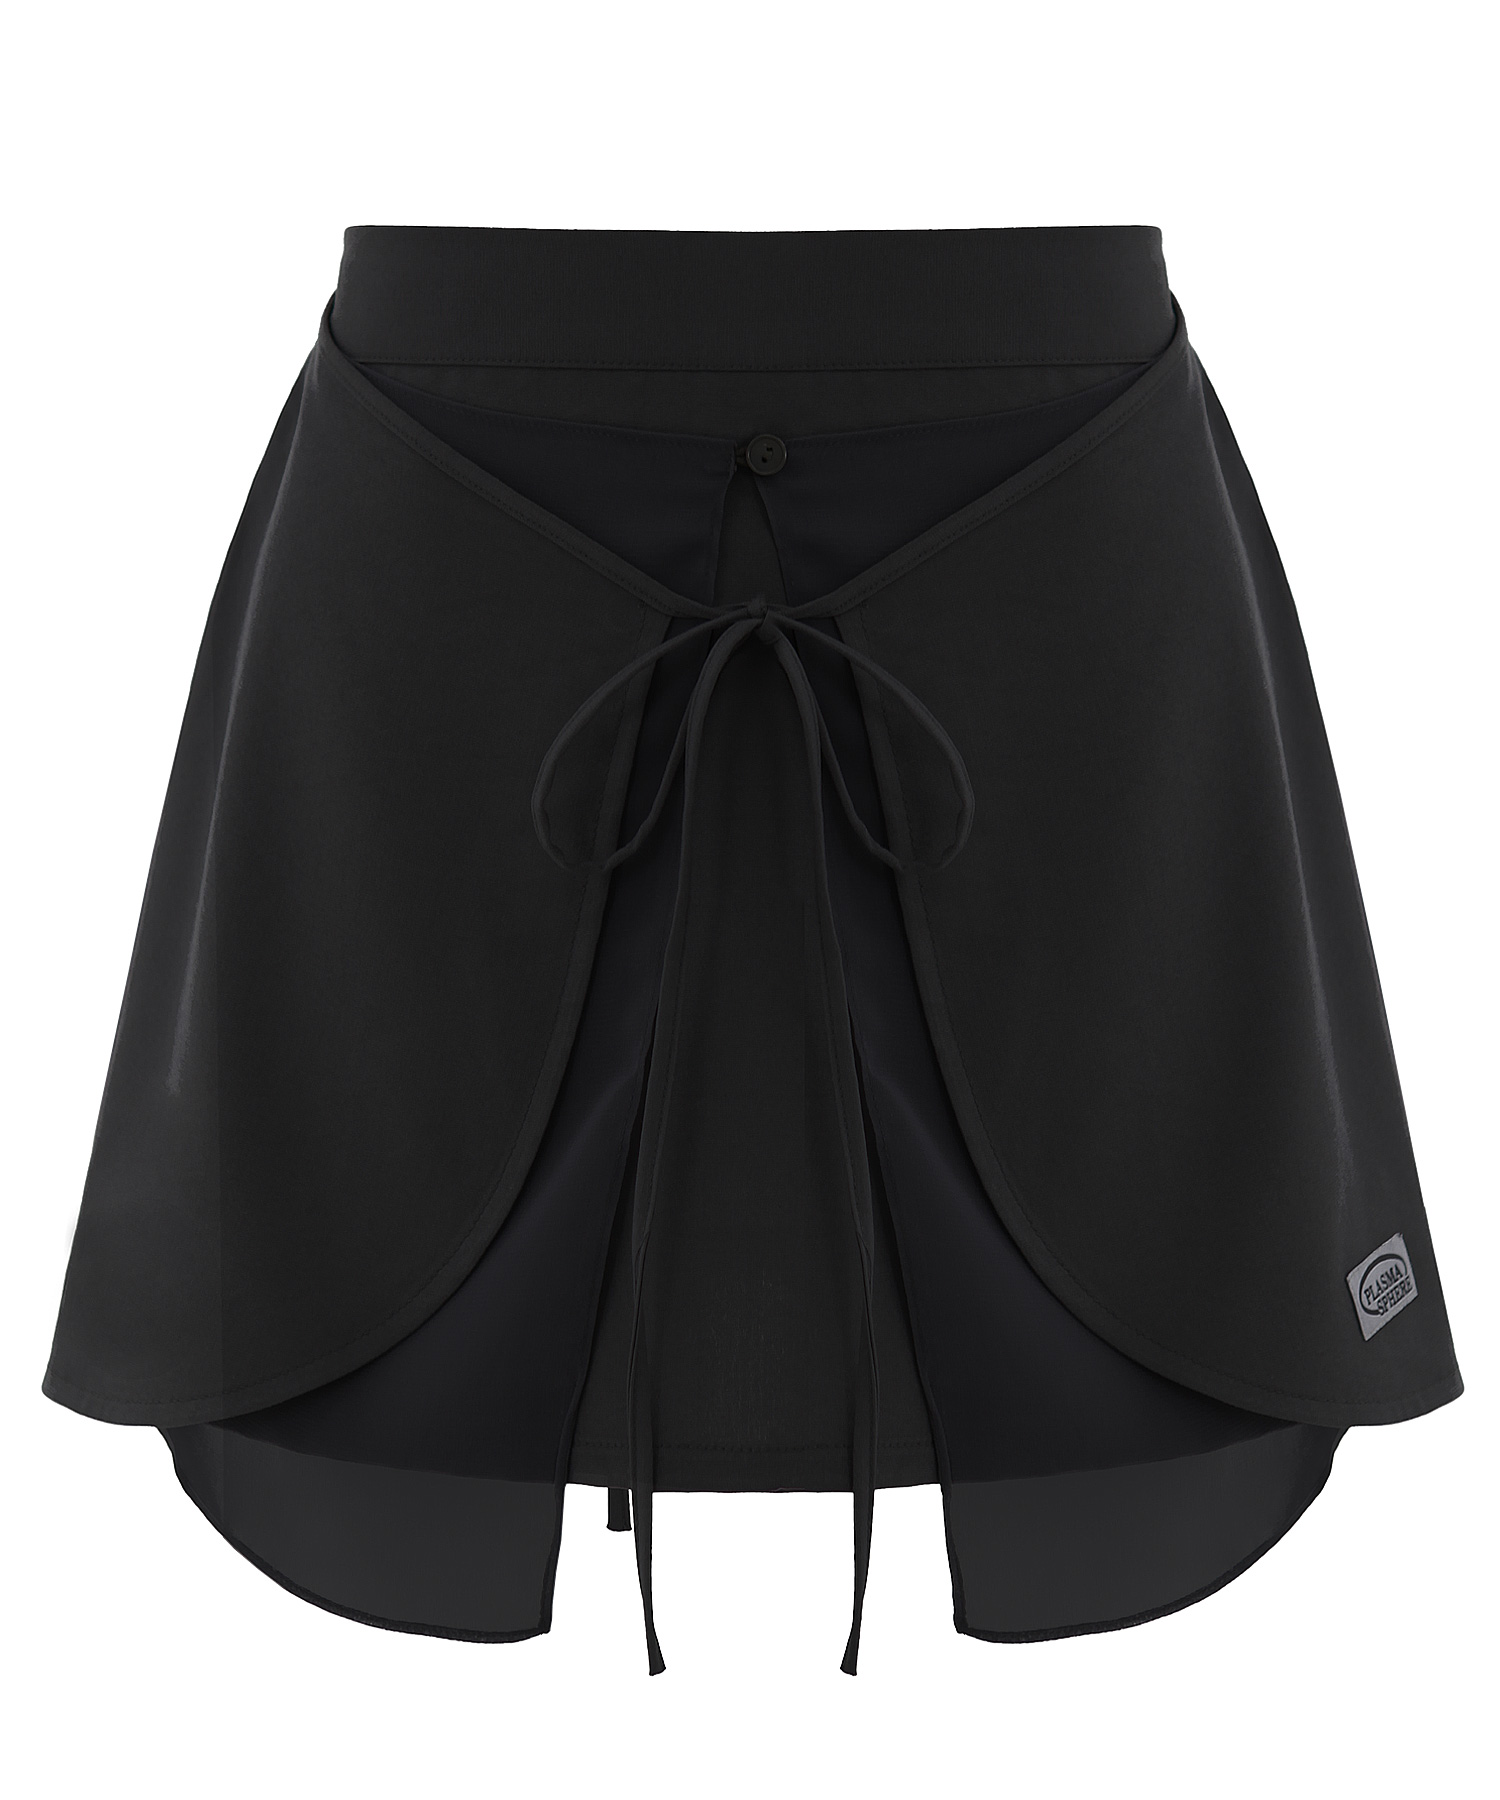 FAIRY SKIRT IN BLACK pre-order delivery May 30th